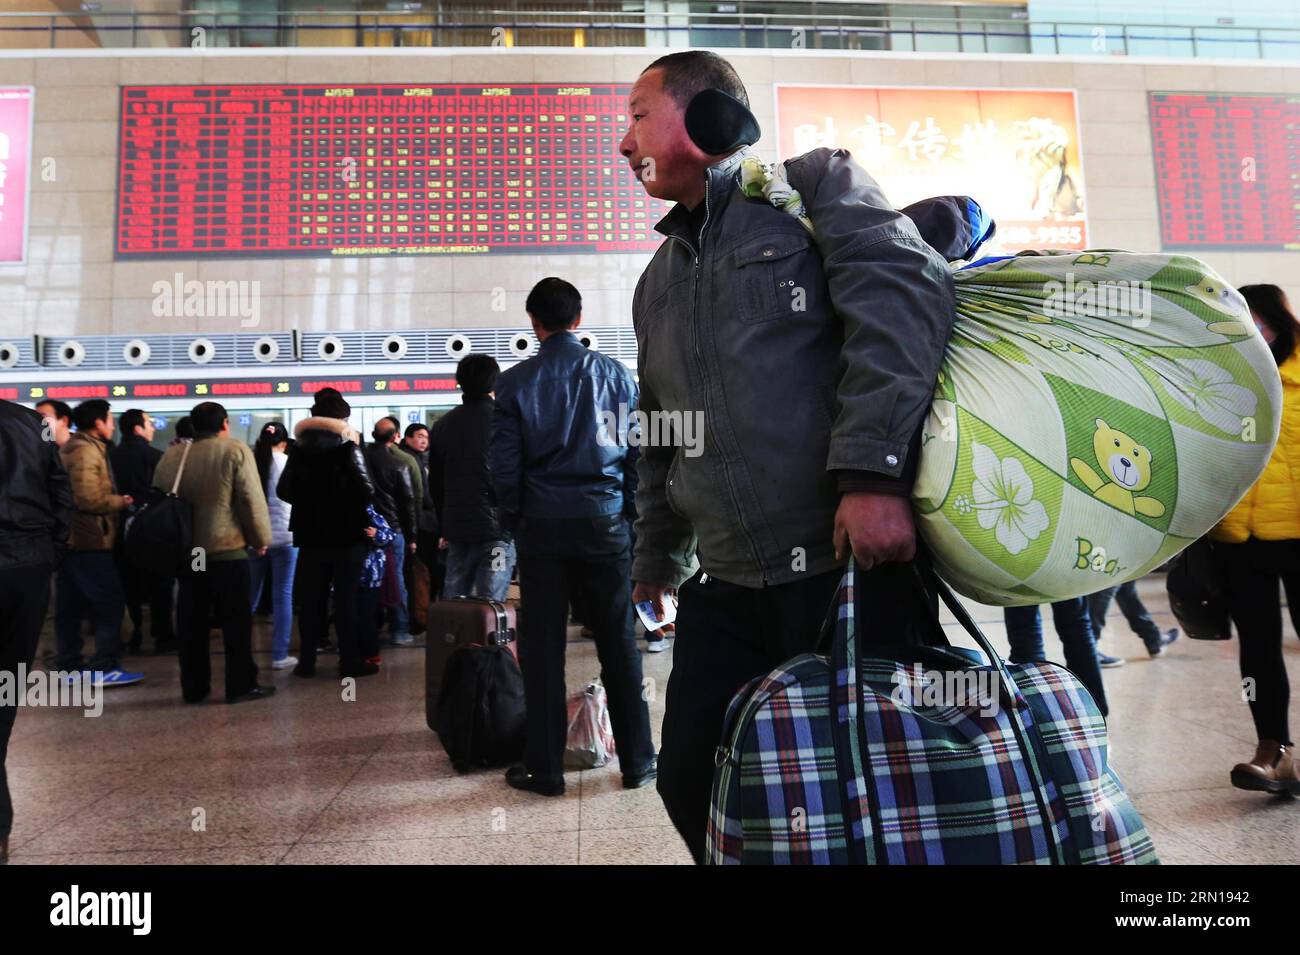 A passenger arrives at the ticket office of Shijiazhuang Railway Station in Shijiazhuang, capital of north China s Hebei Province, Dec. 7, 2014. China Railway Corporation (CRC), operator of China s rail network, started to sell train tickets for the 40-day travel period known as chunyun on Sunday . Chunyun , sometimes called the world s largest human migration, is the hectic travel period surrounding Chinese New Year. This year, chunyun will begin on Feb. 4 and last until March 16. ) (hdt) CHINA-RAILWAY-TICKET (CN) ZhengxRongxi PUBLICATIONxNOTxINxCHN   a Passenger arrives AT The Ticket Office Stock Photo